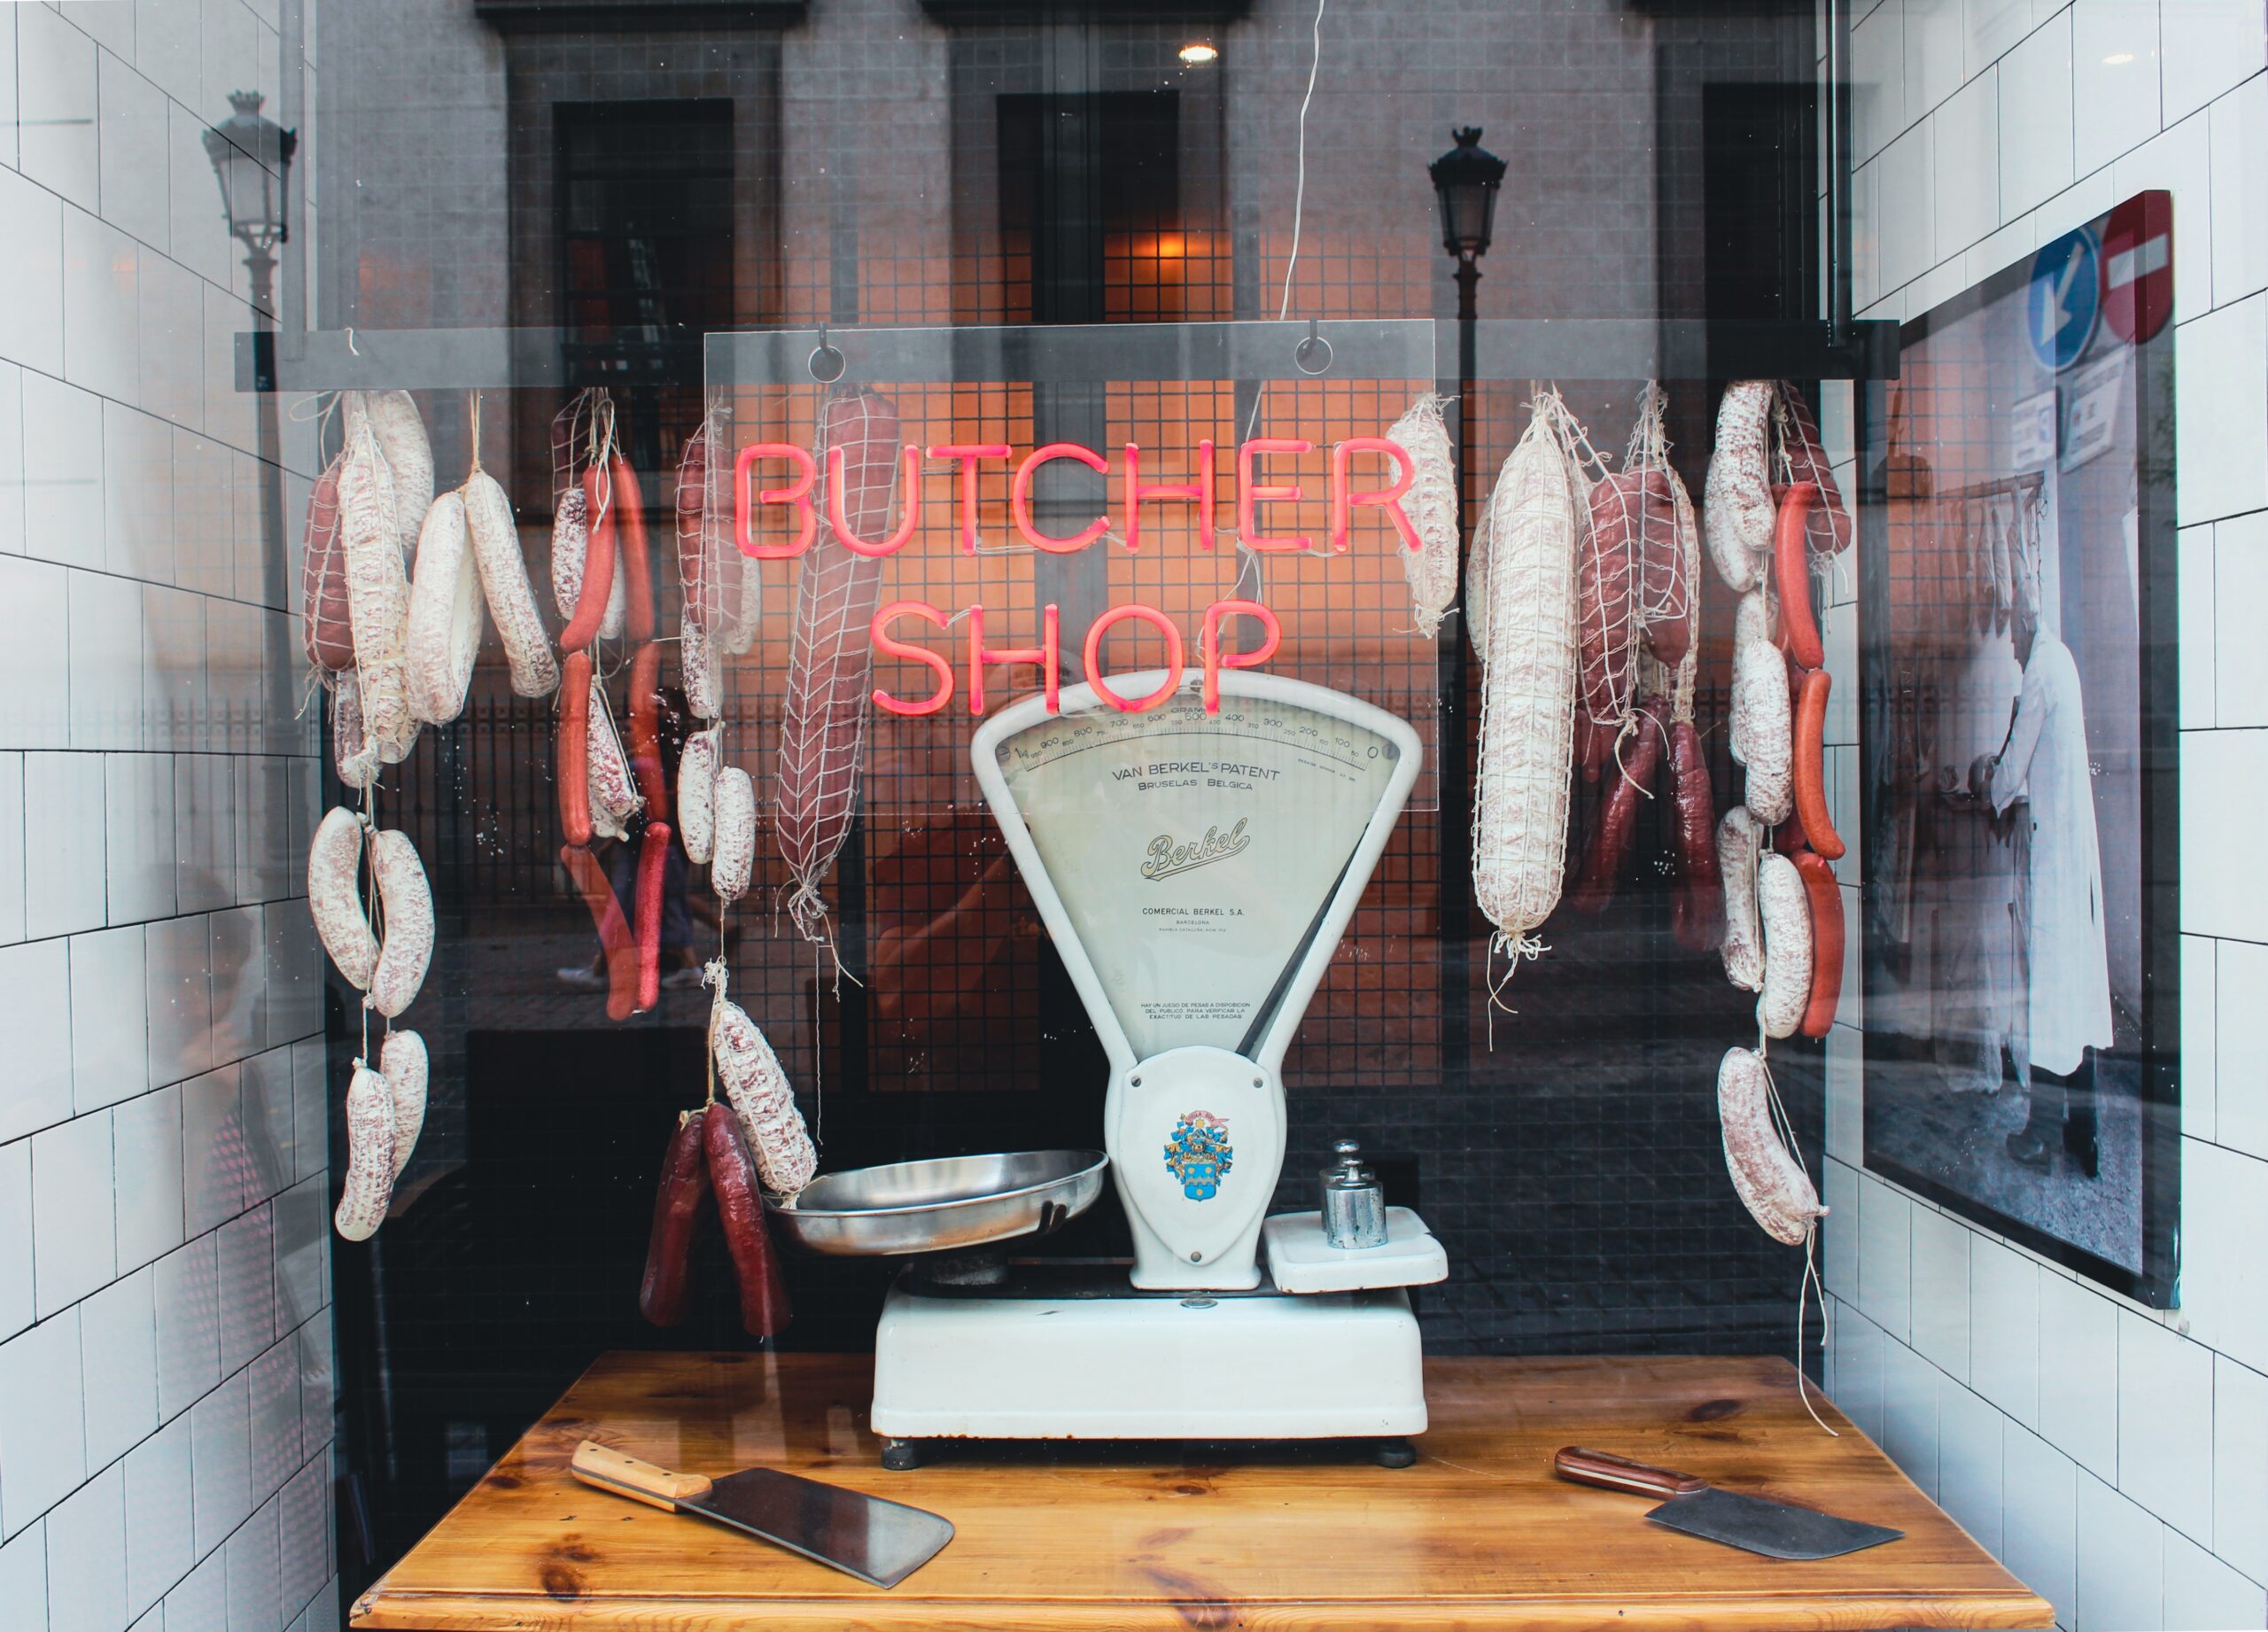 meat strung up in a butcher's window using butcher's twine